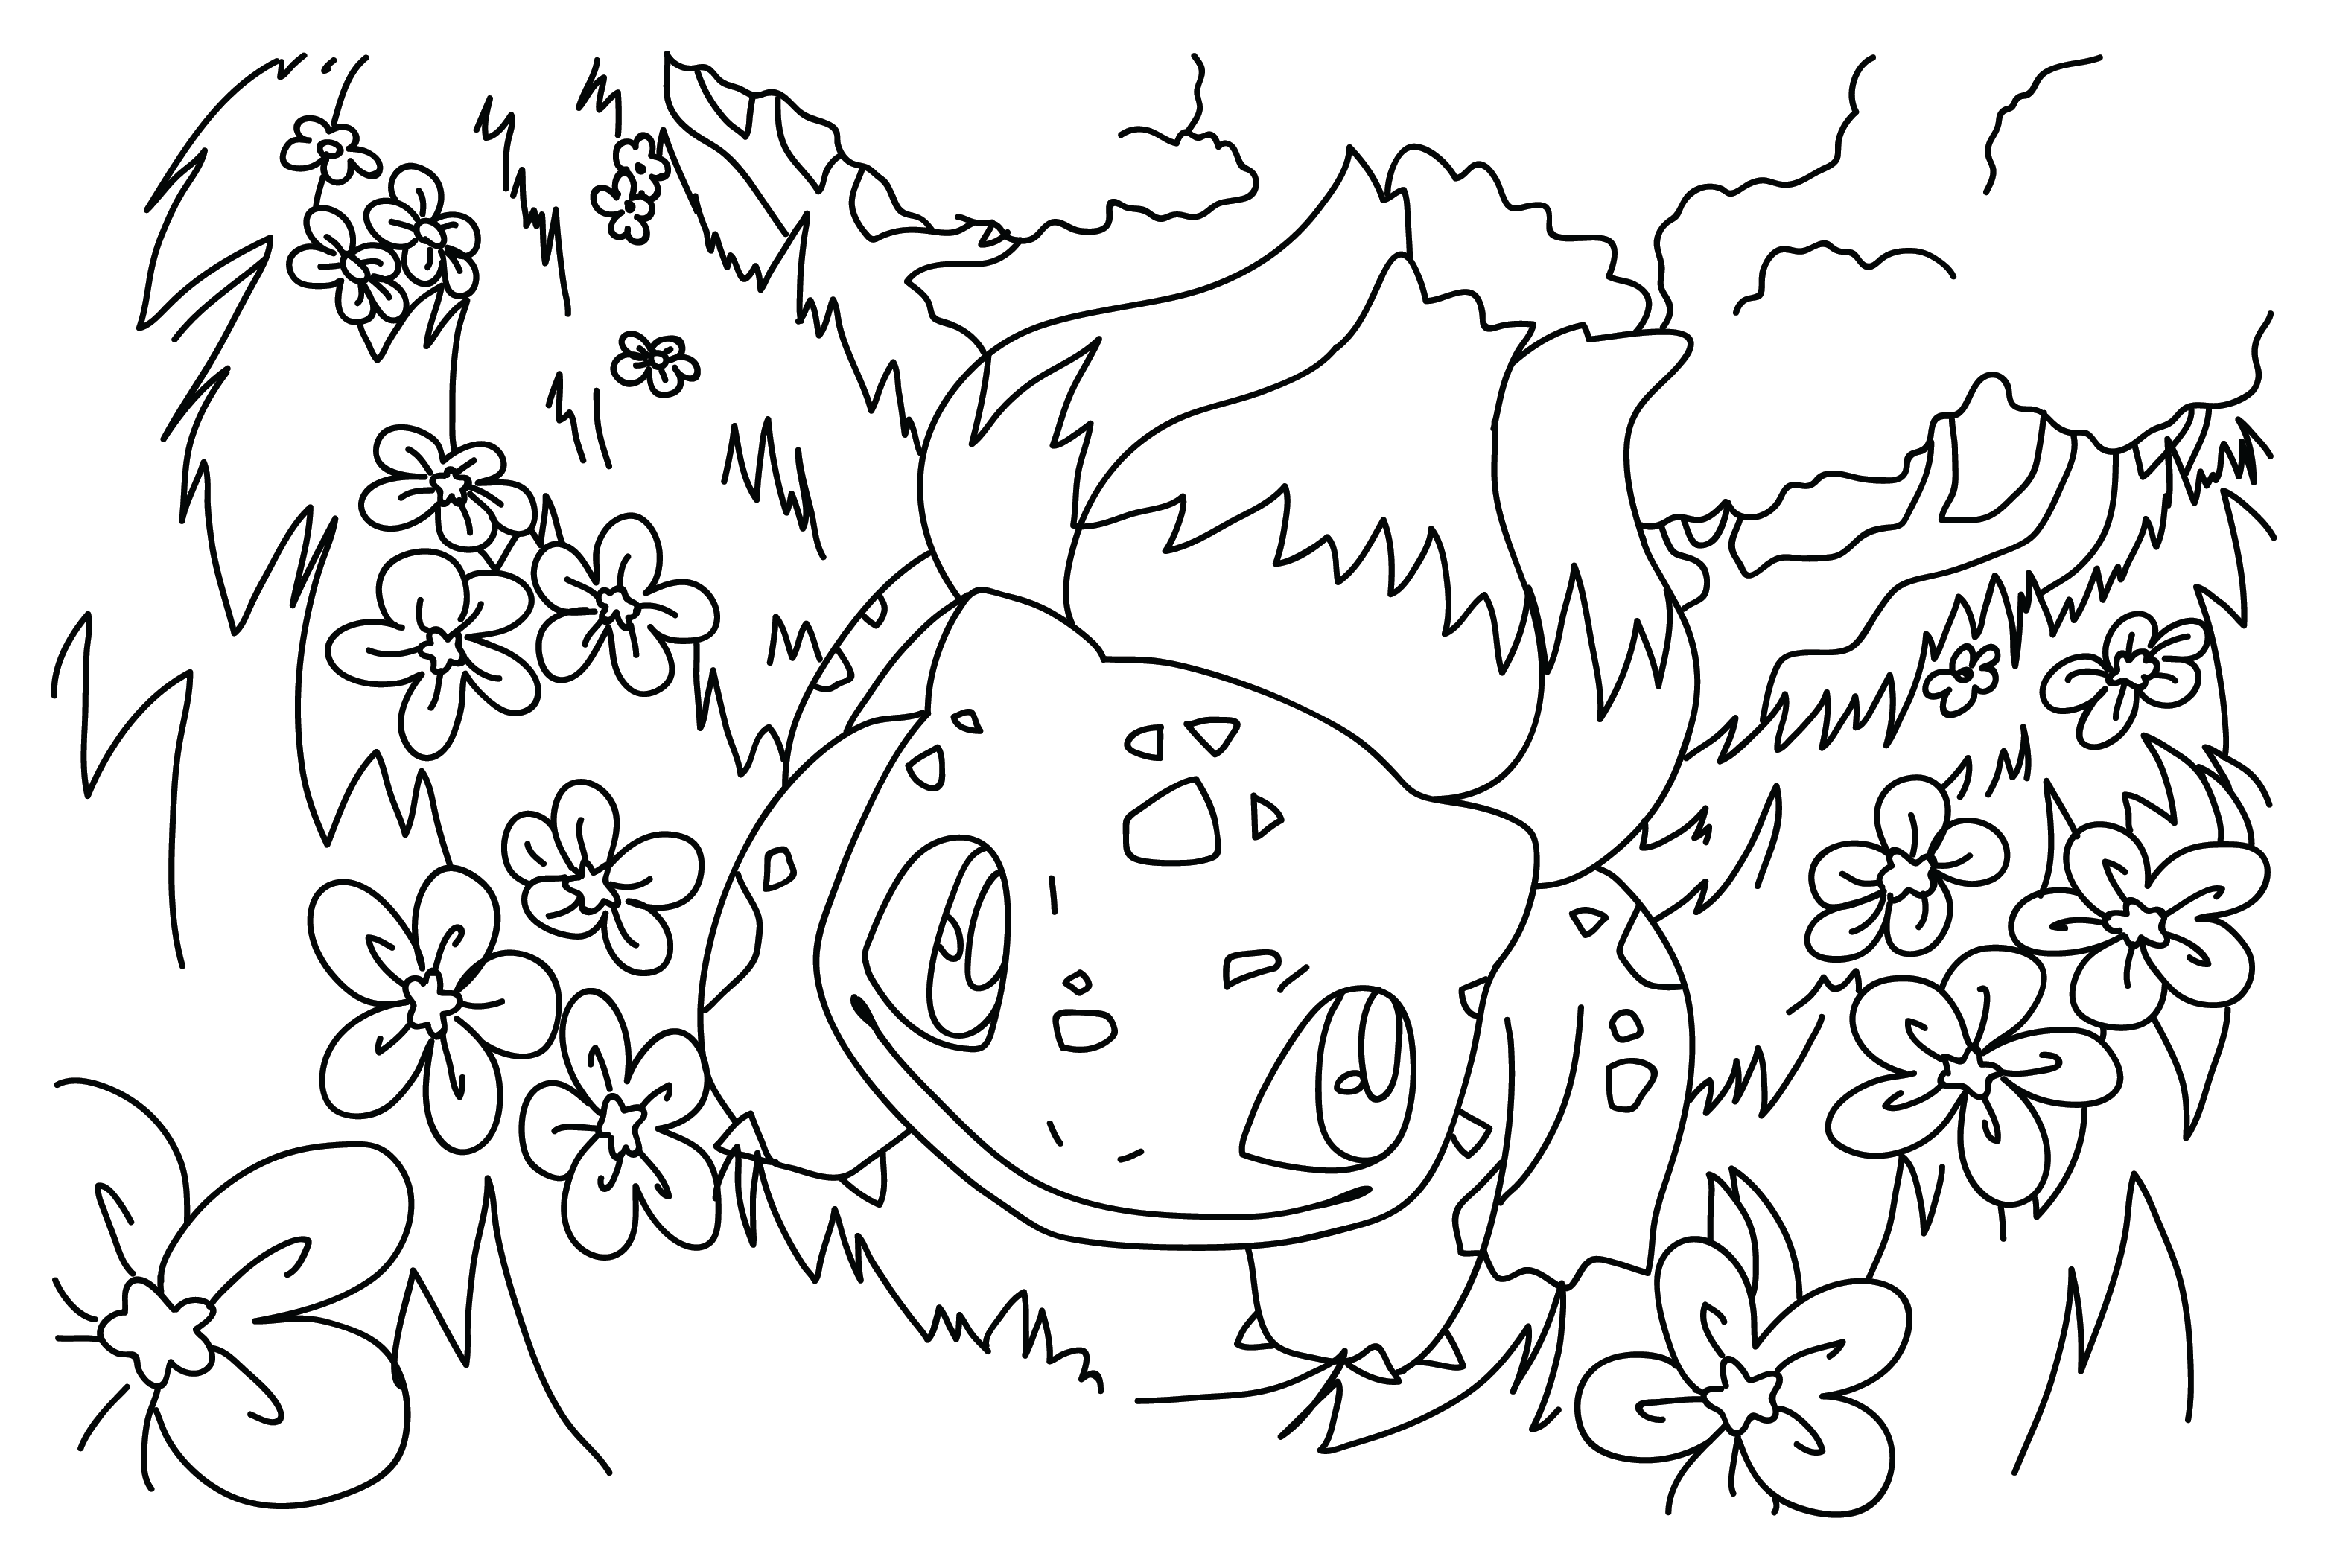 Bulbasaur Coloring Page Free from Bulbasaur